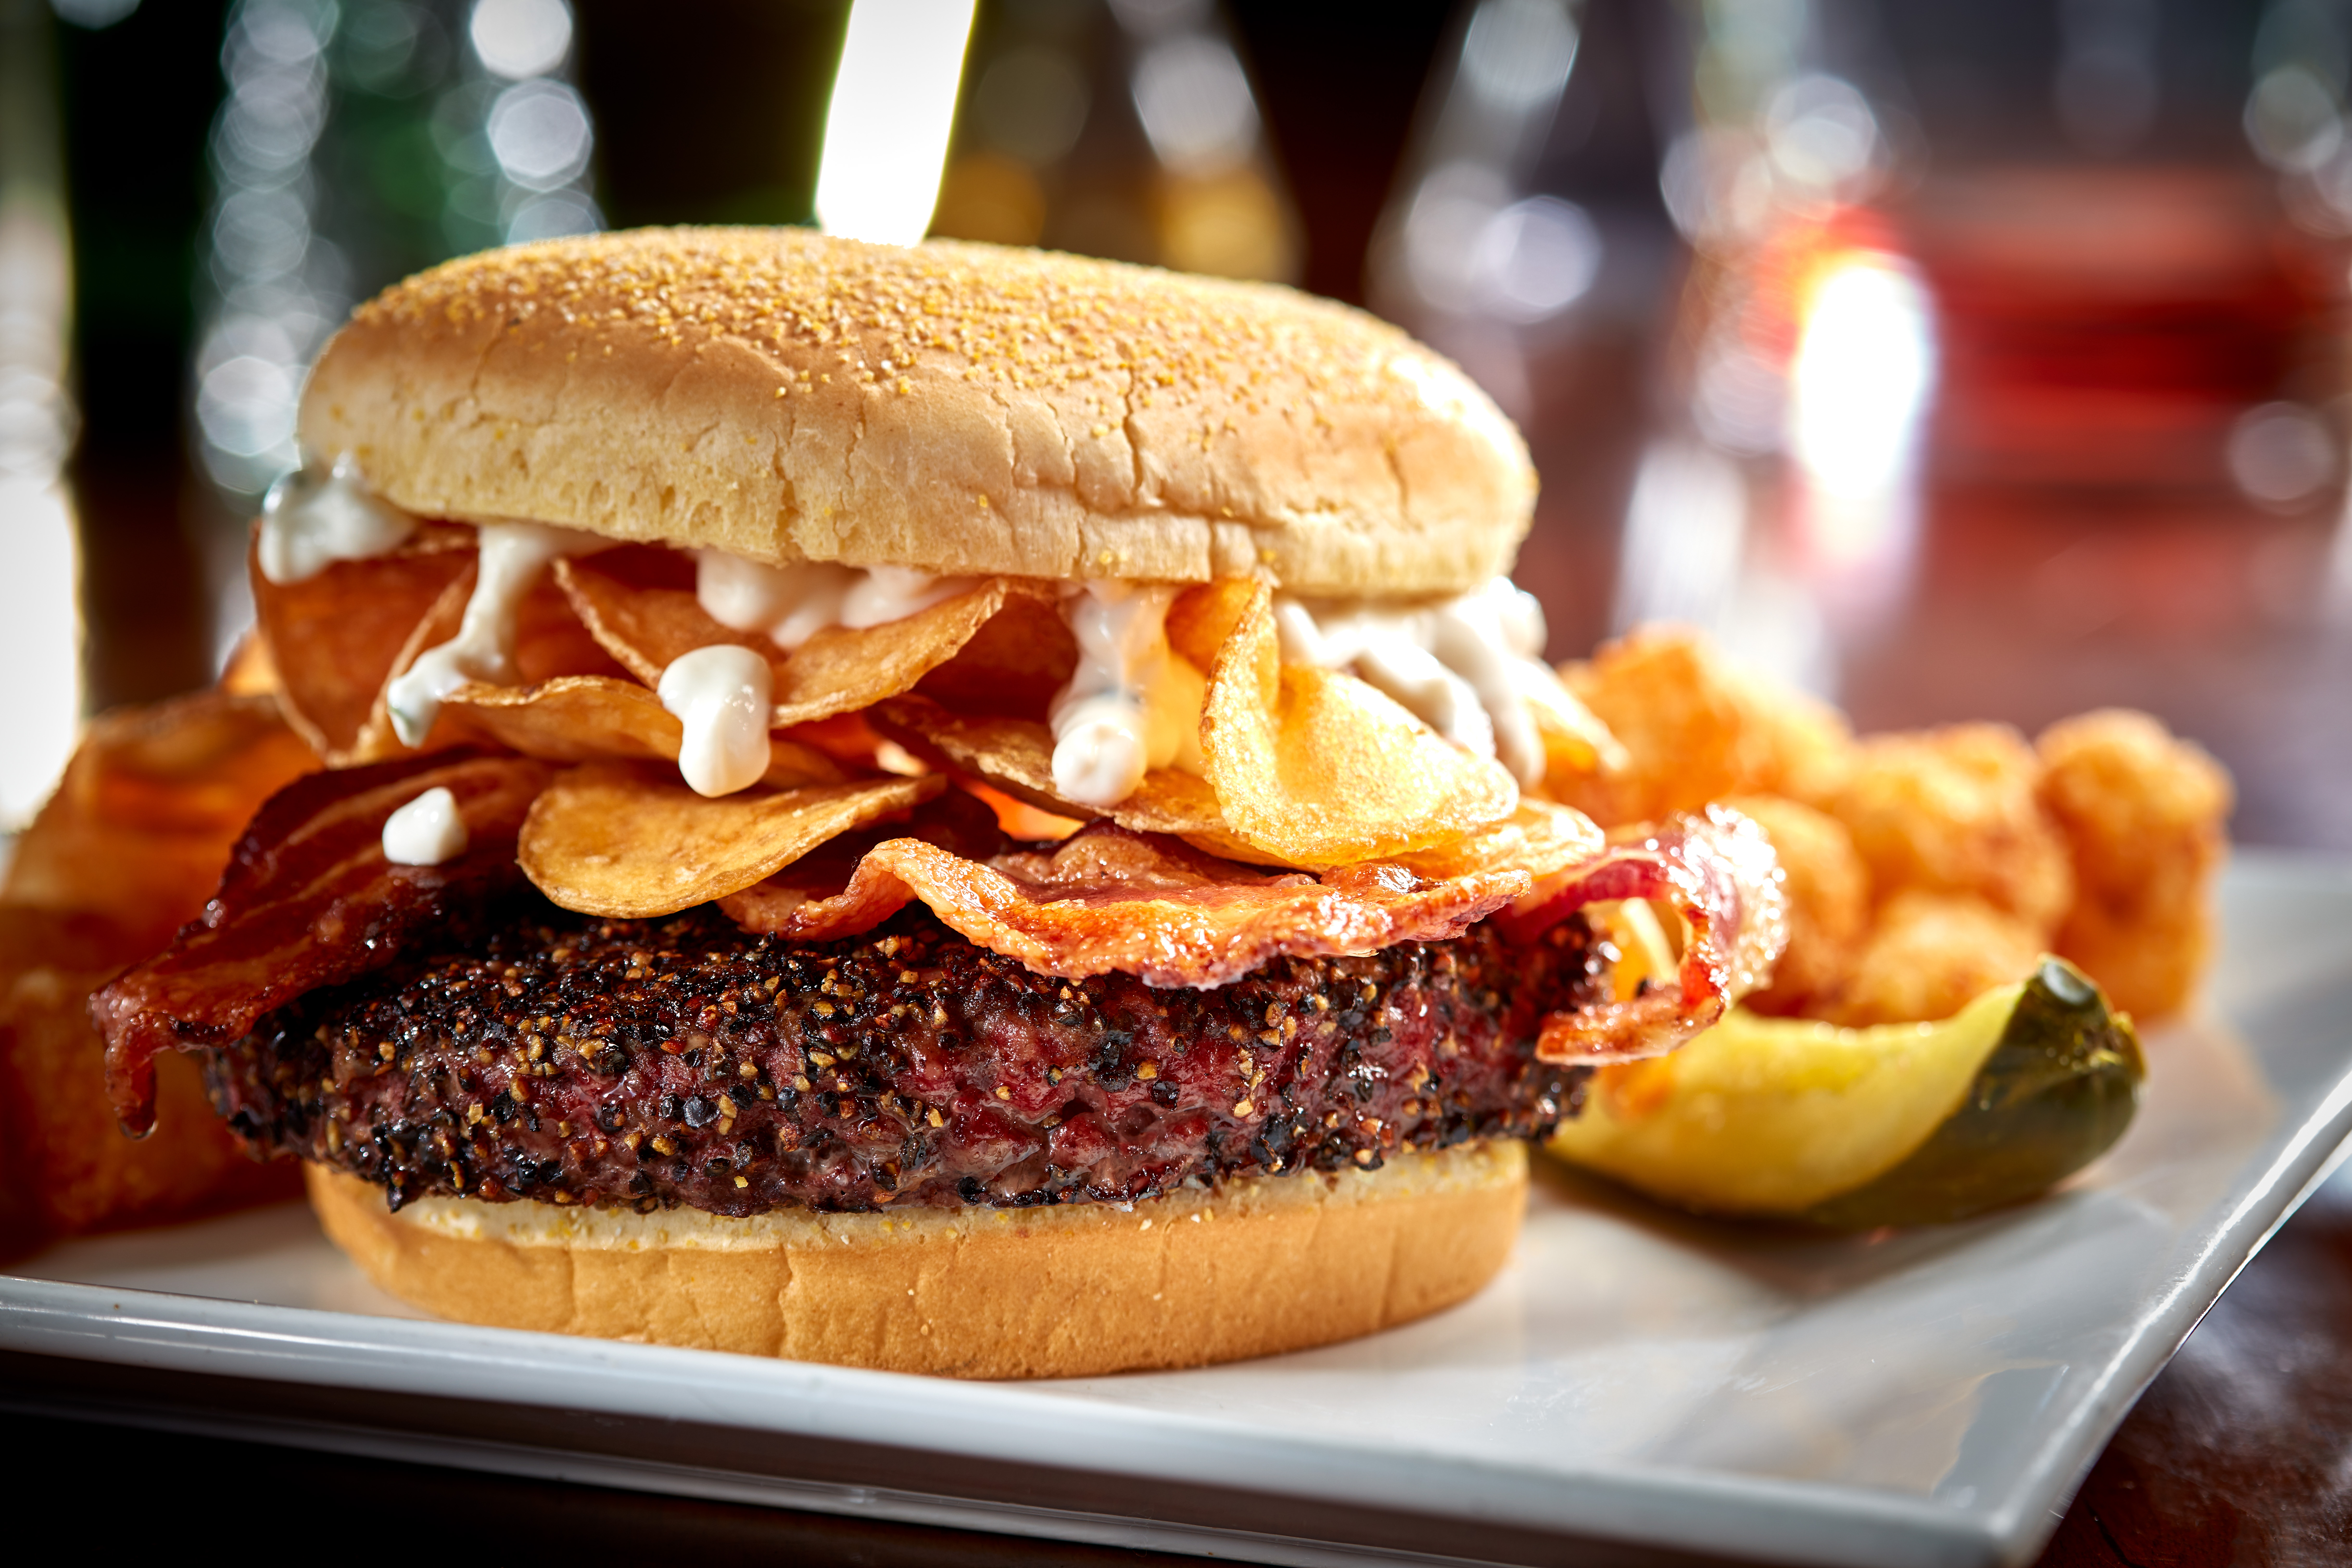 Black peppercorn crusted burger topped with double smoked bacon, house fried pub chips and garlic-chive aioli. $15.99